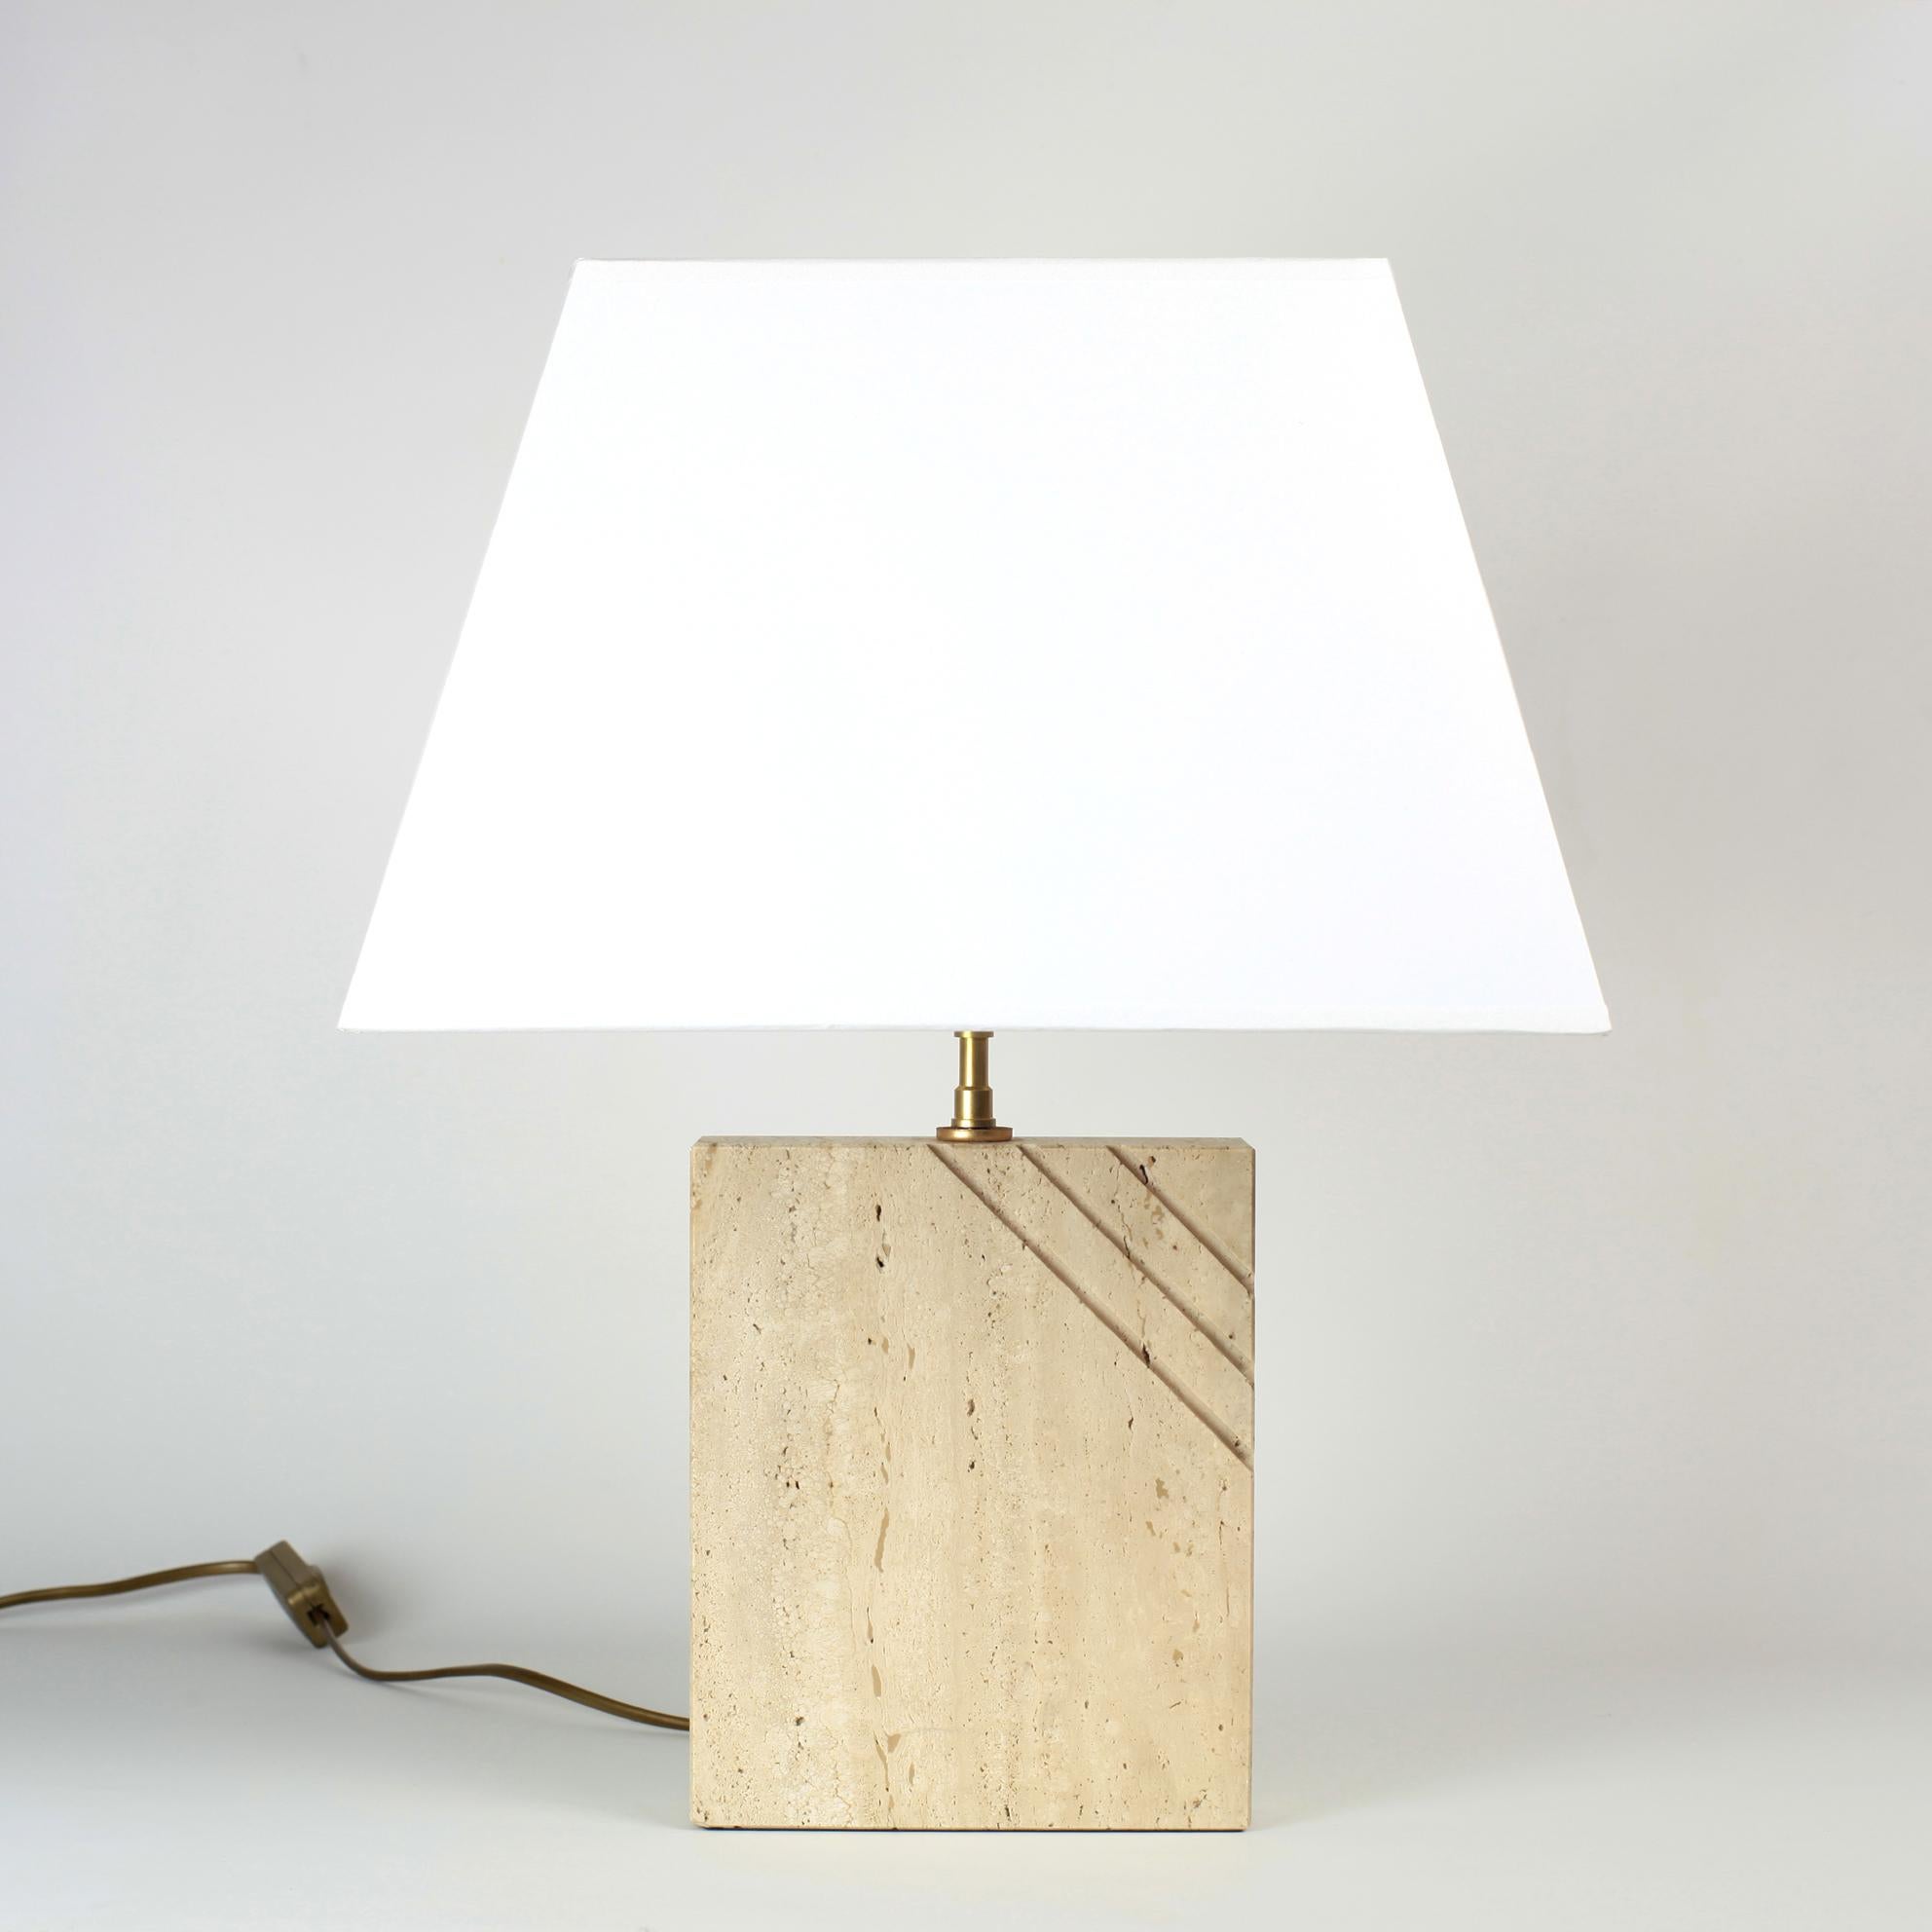 Elegant carved travertine table lamp from Italy circa 1970

Height 30cm without shade
base is 17 cm width x 5 cm depth
E27 bulb